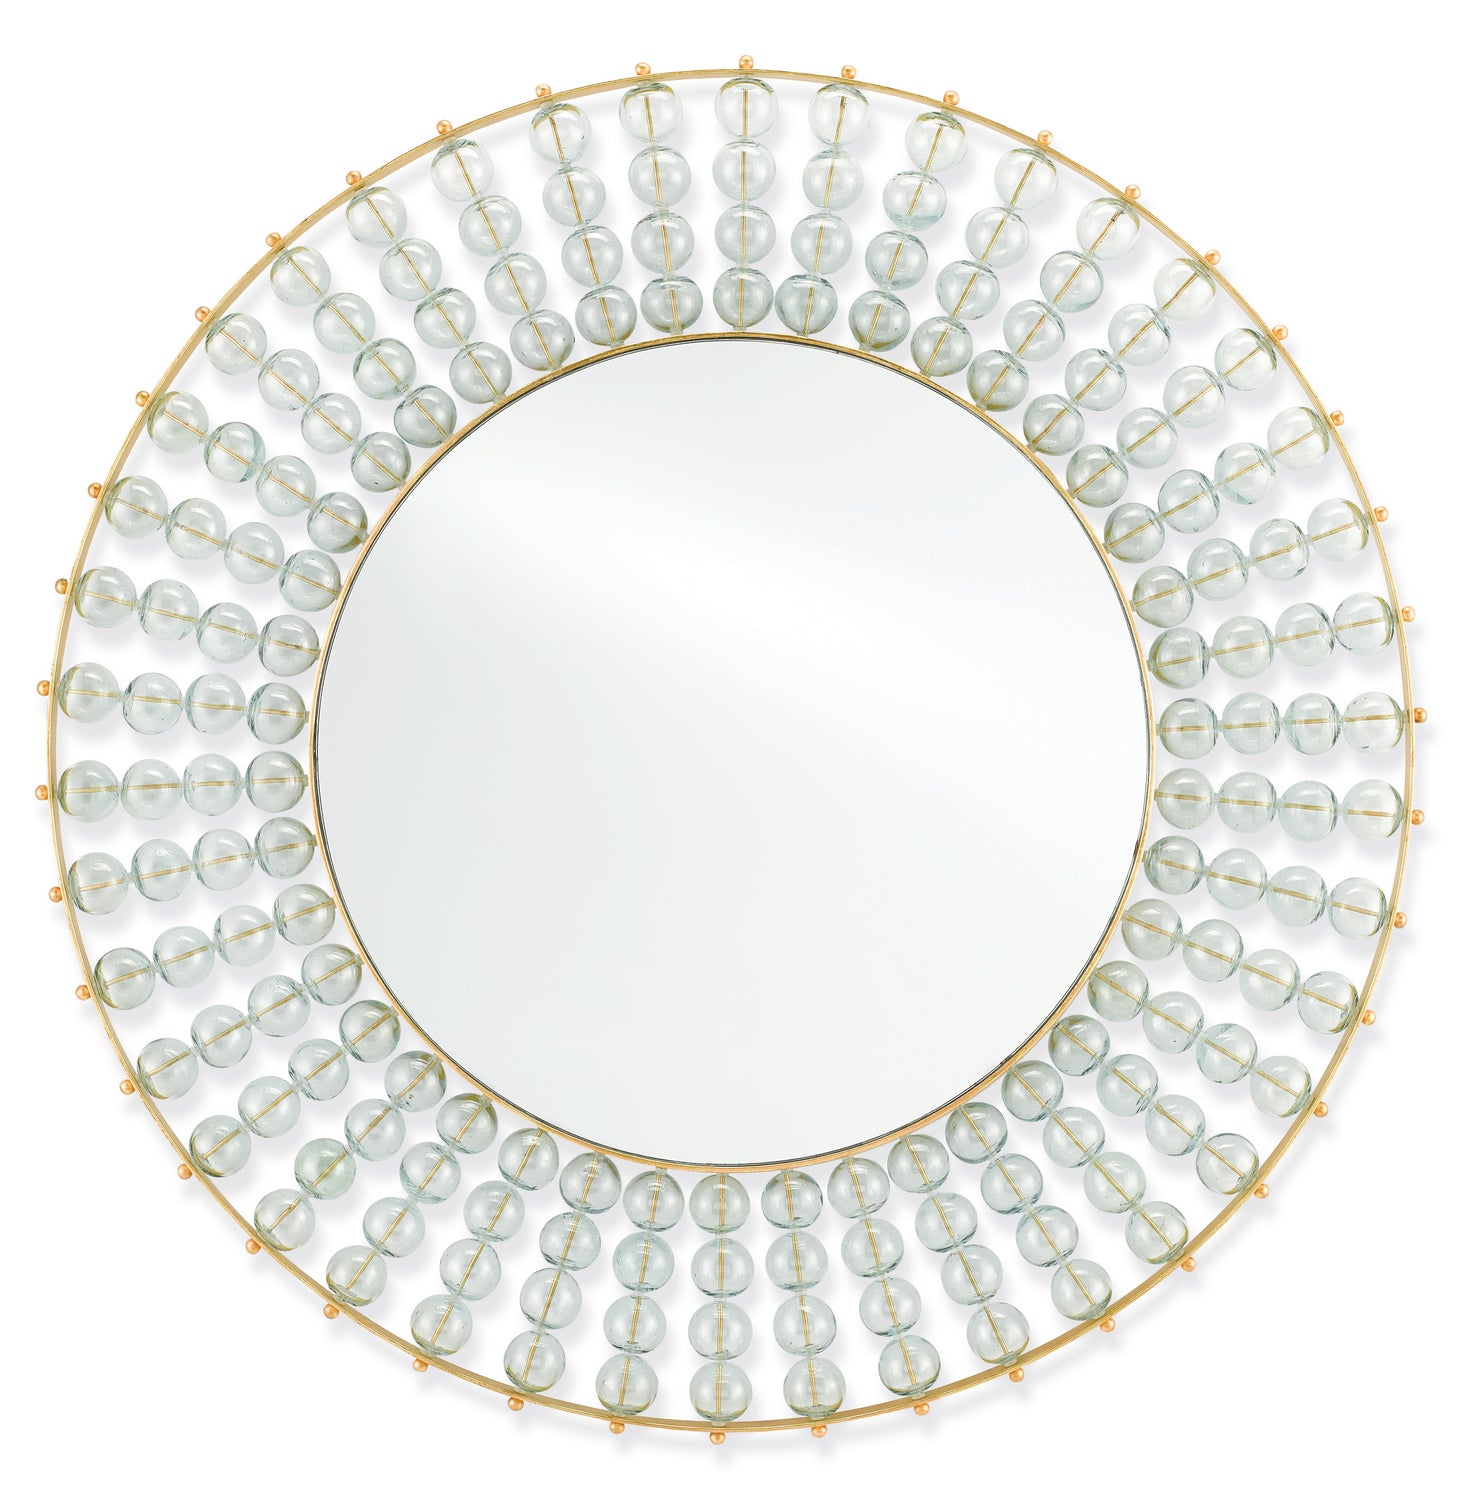 Mirror from the Calais collection in Gold Leaf/Mirror finish